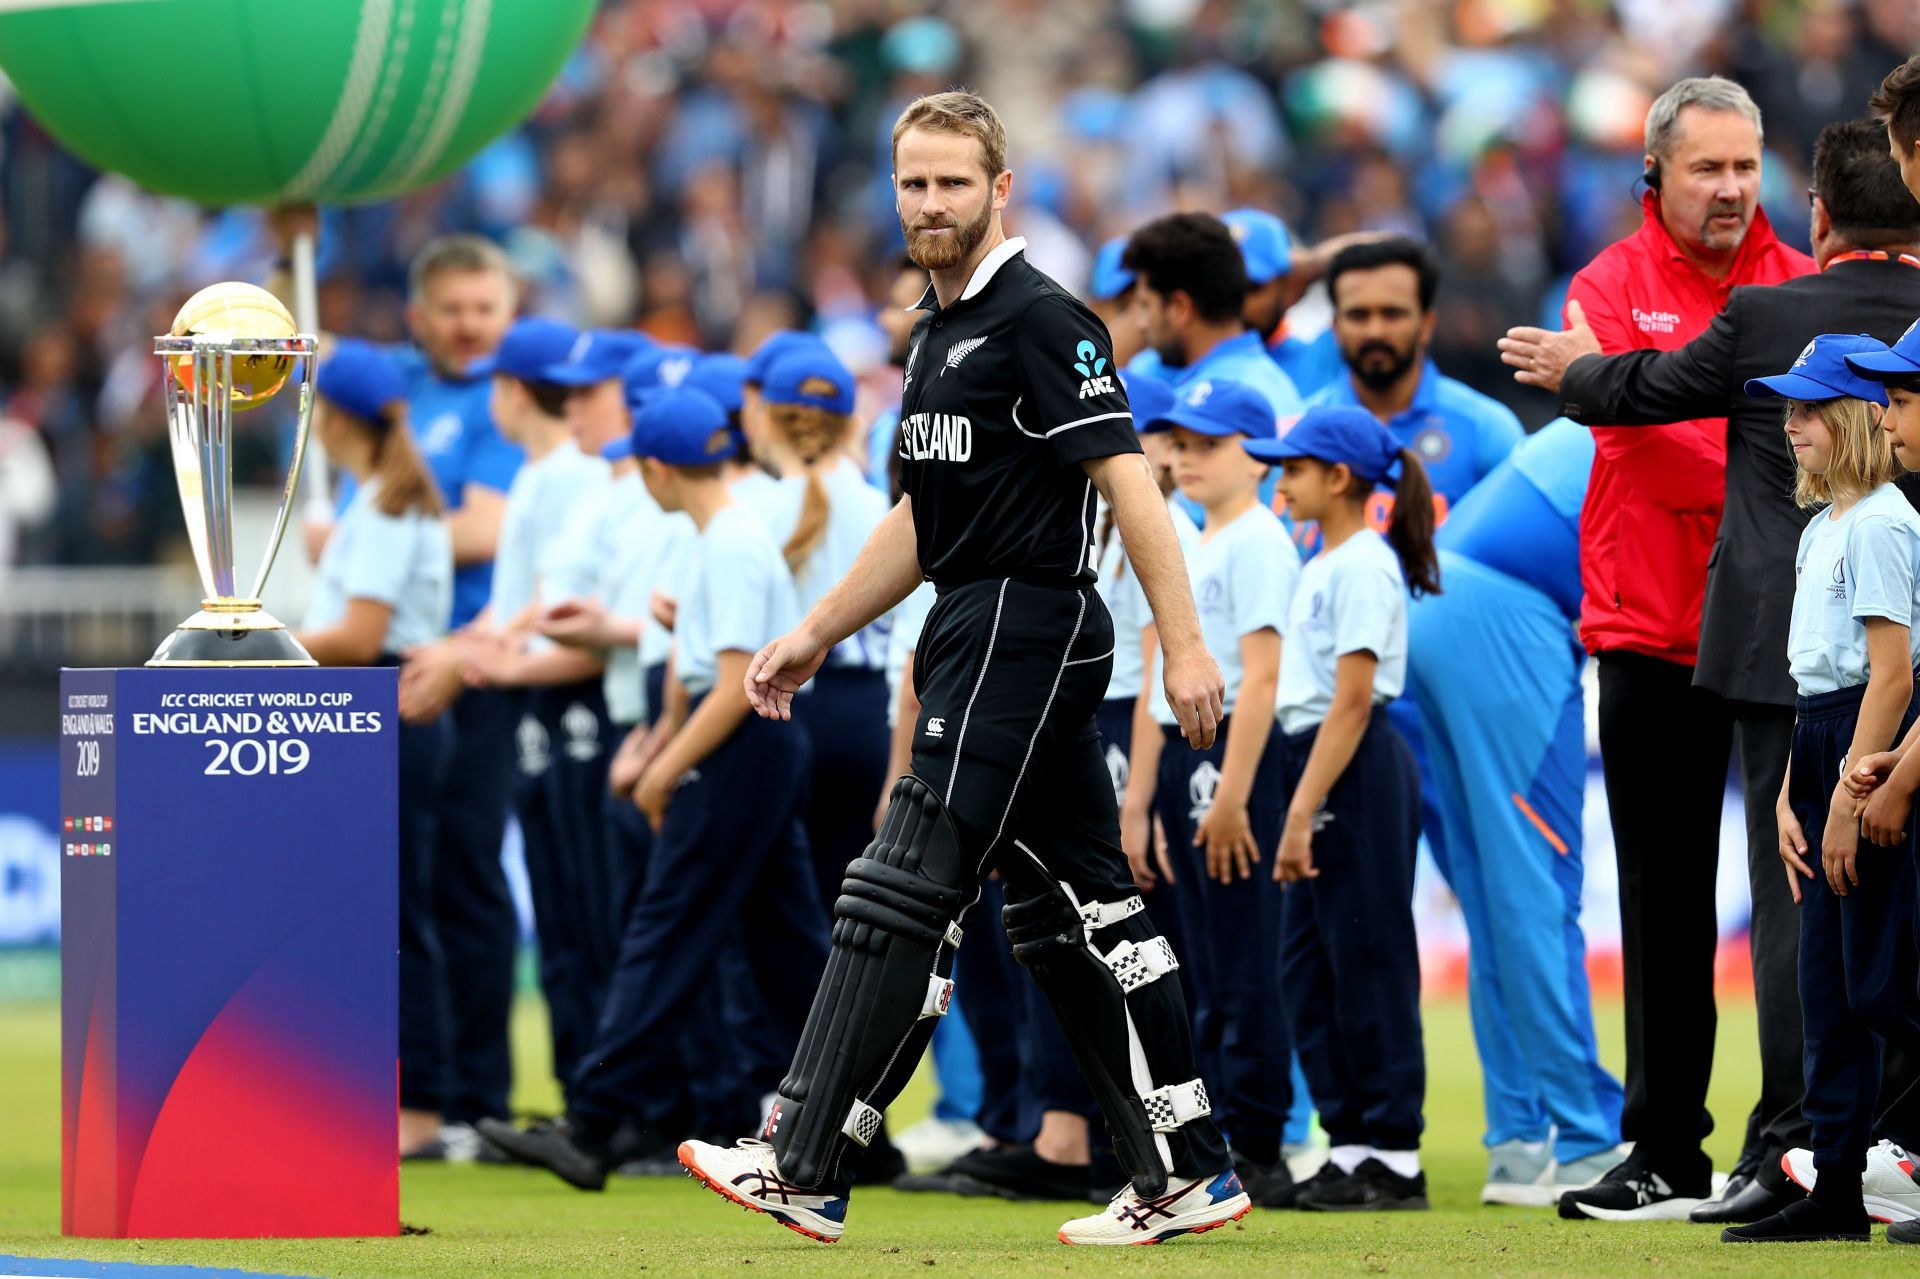 Kane Williamson will be the player to watch out for in the India vs New Zealand T20 World Cup match